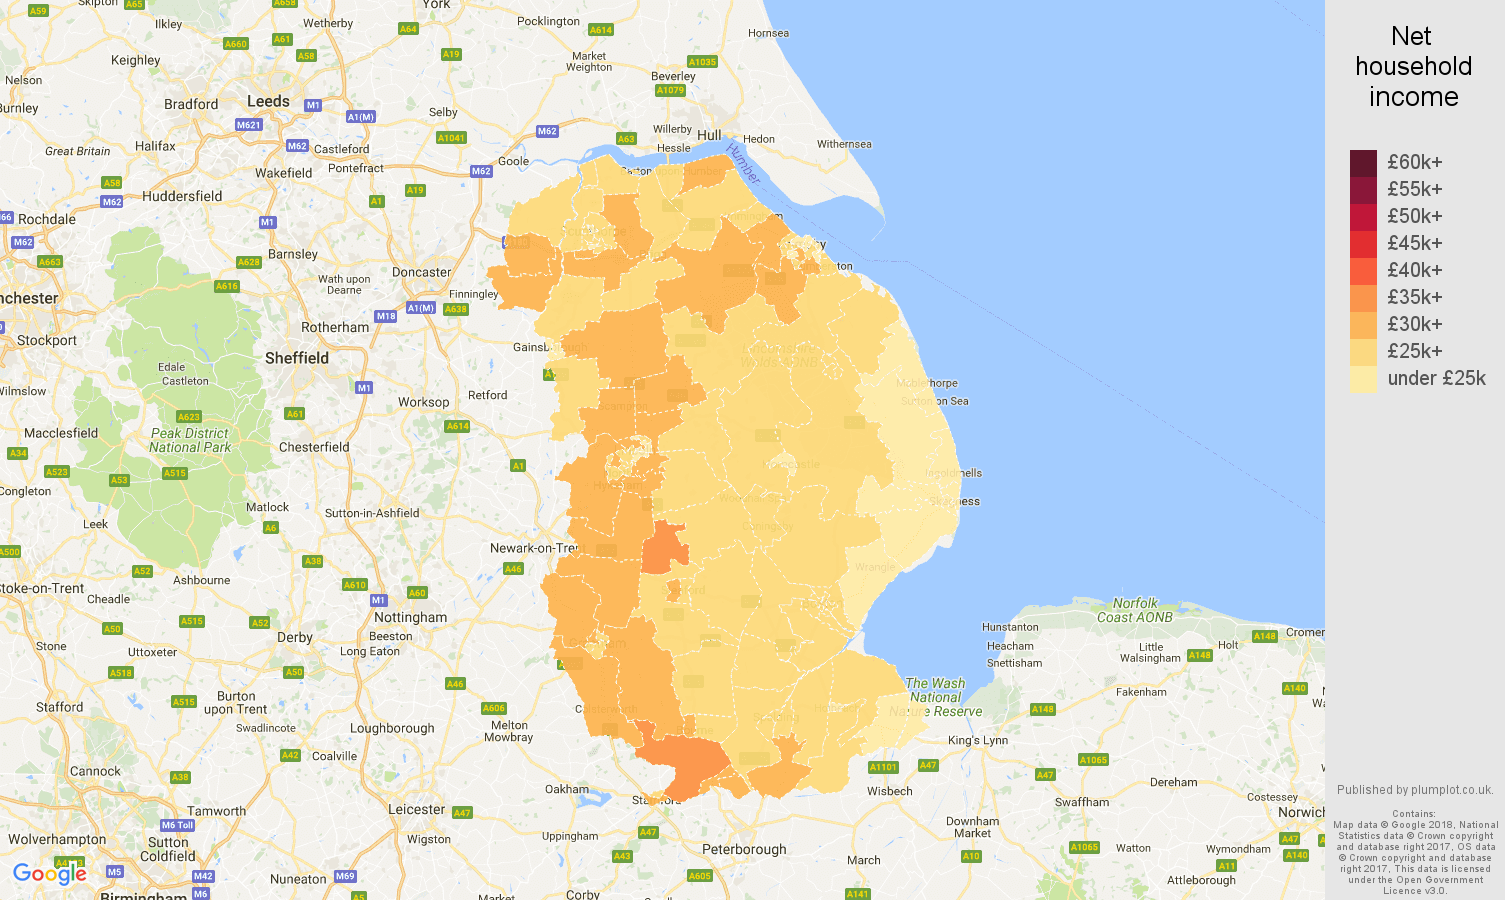 Lincolnshire net household income map